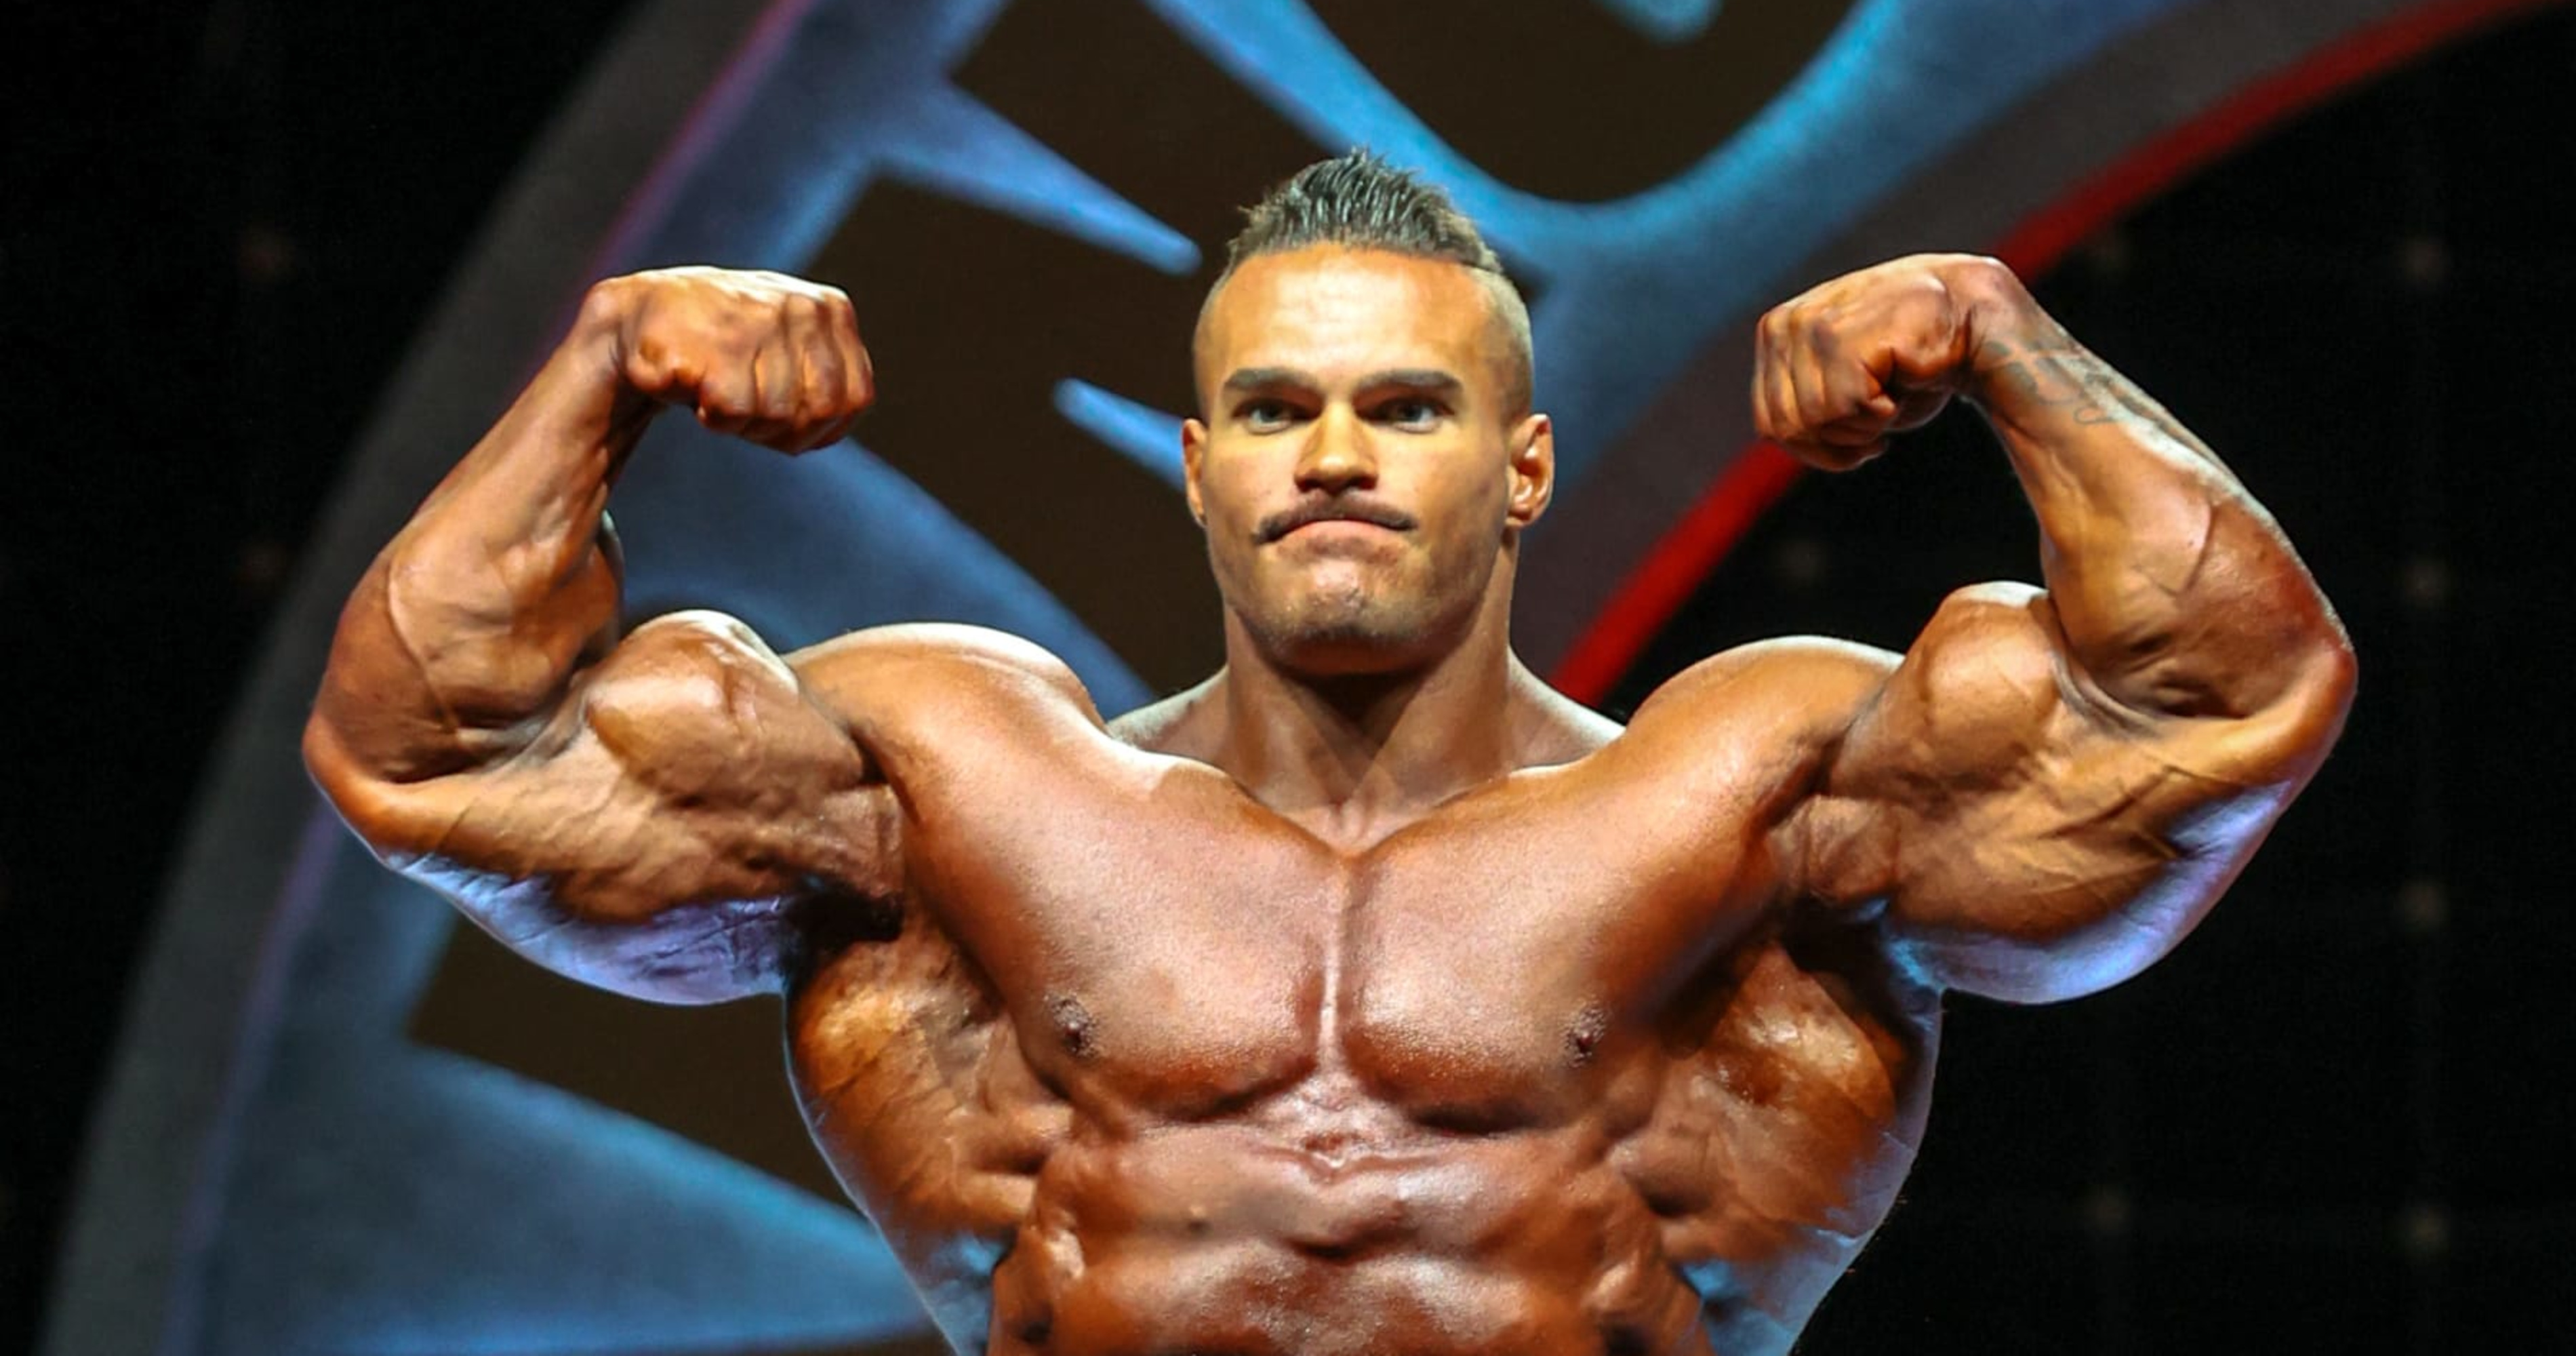 Mr. Olympia 2022: Final Results, Top Videos and Predictions for 2023 Event, News, Scores, Highlights, Stats, and Rumors